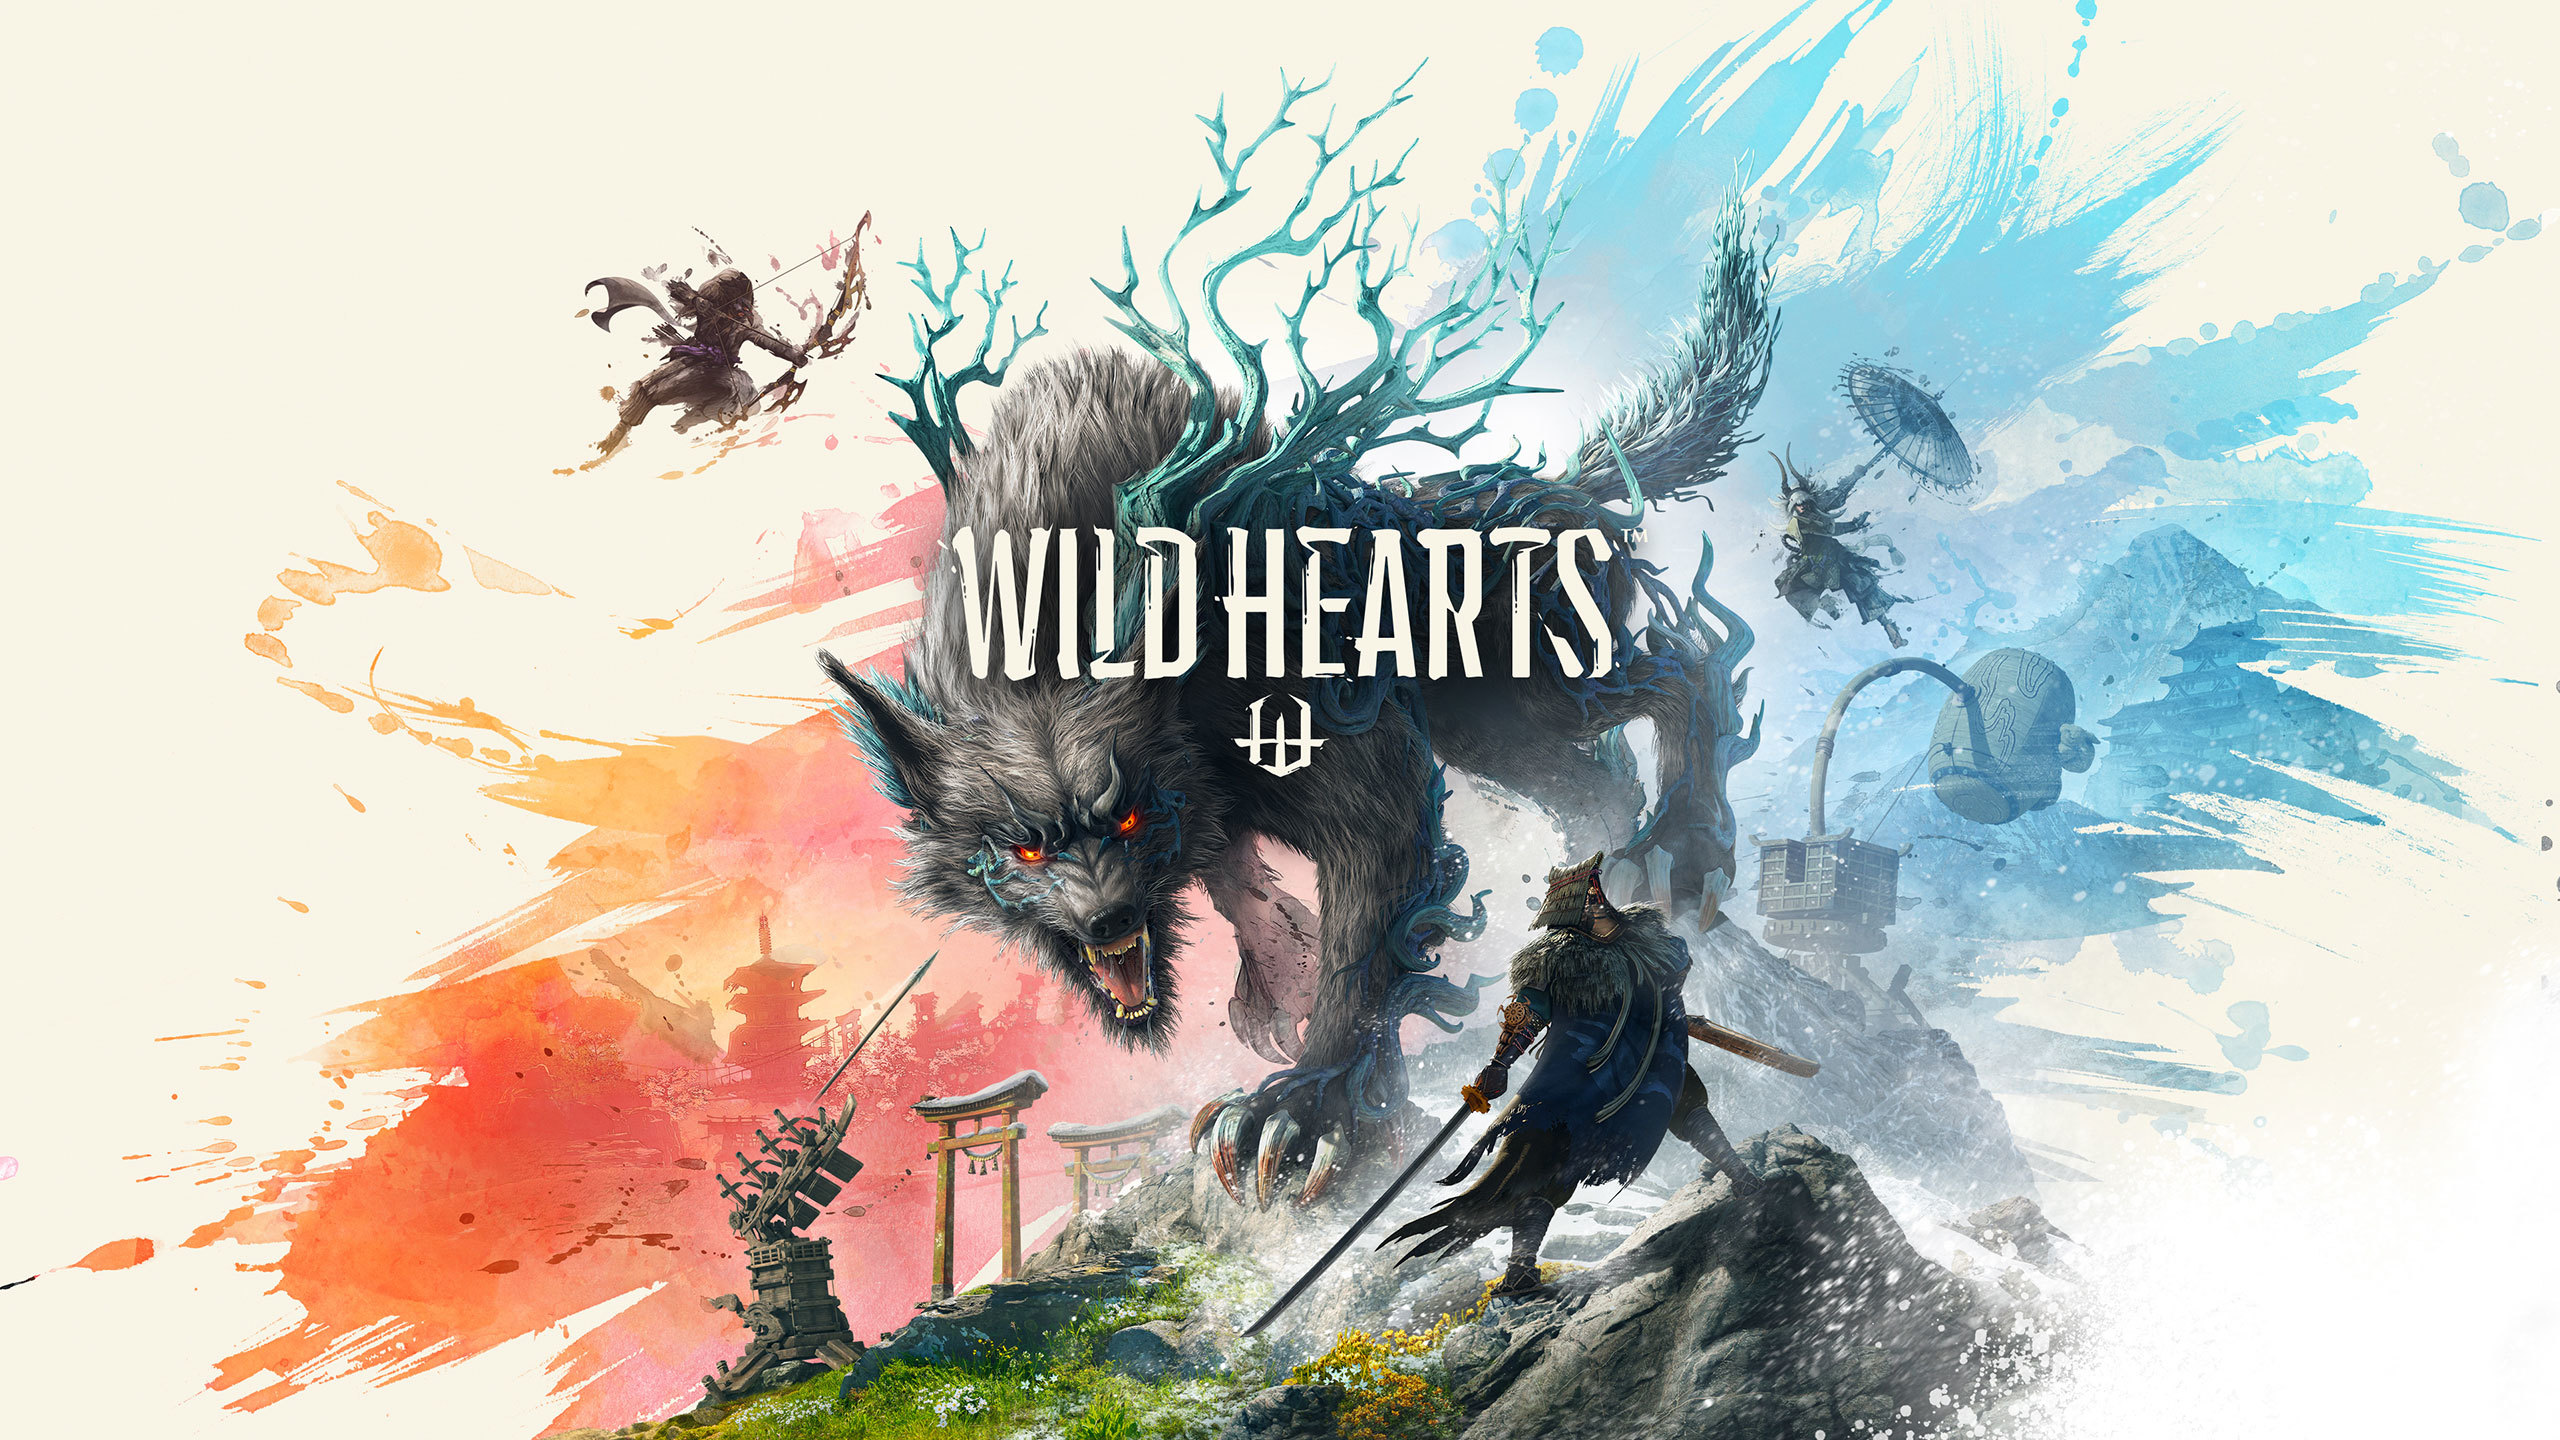 Wild Hearts invites us to meet its characters in the new story trailer